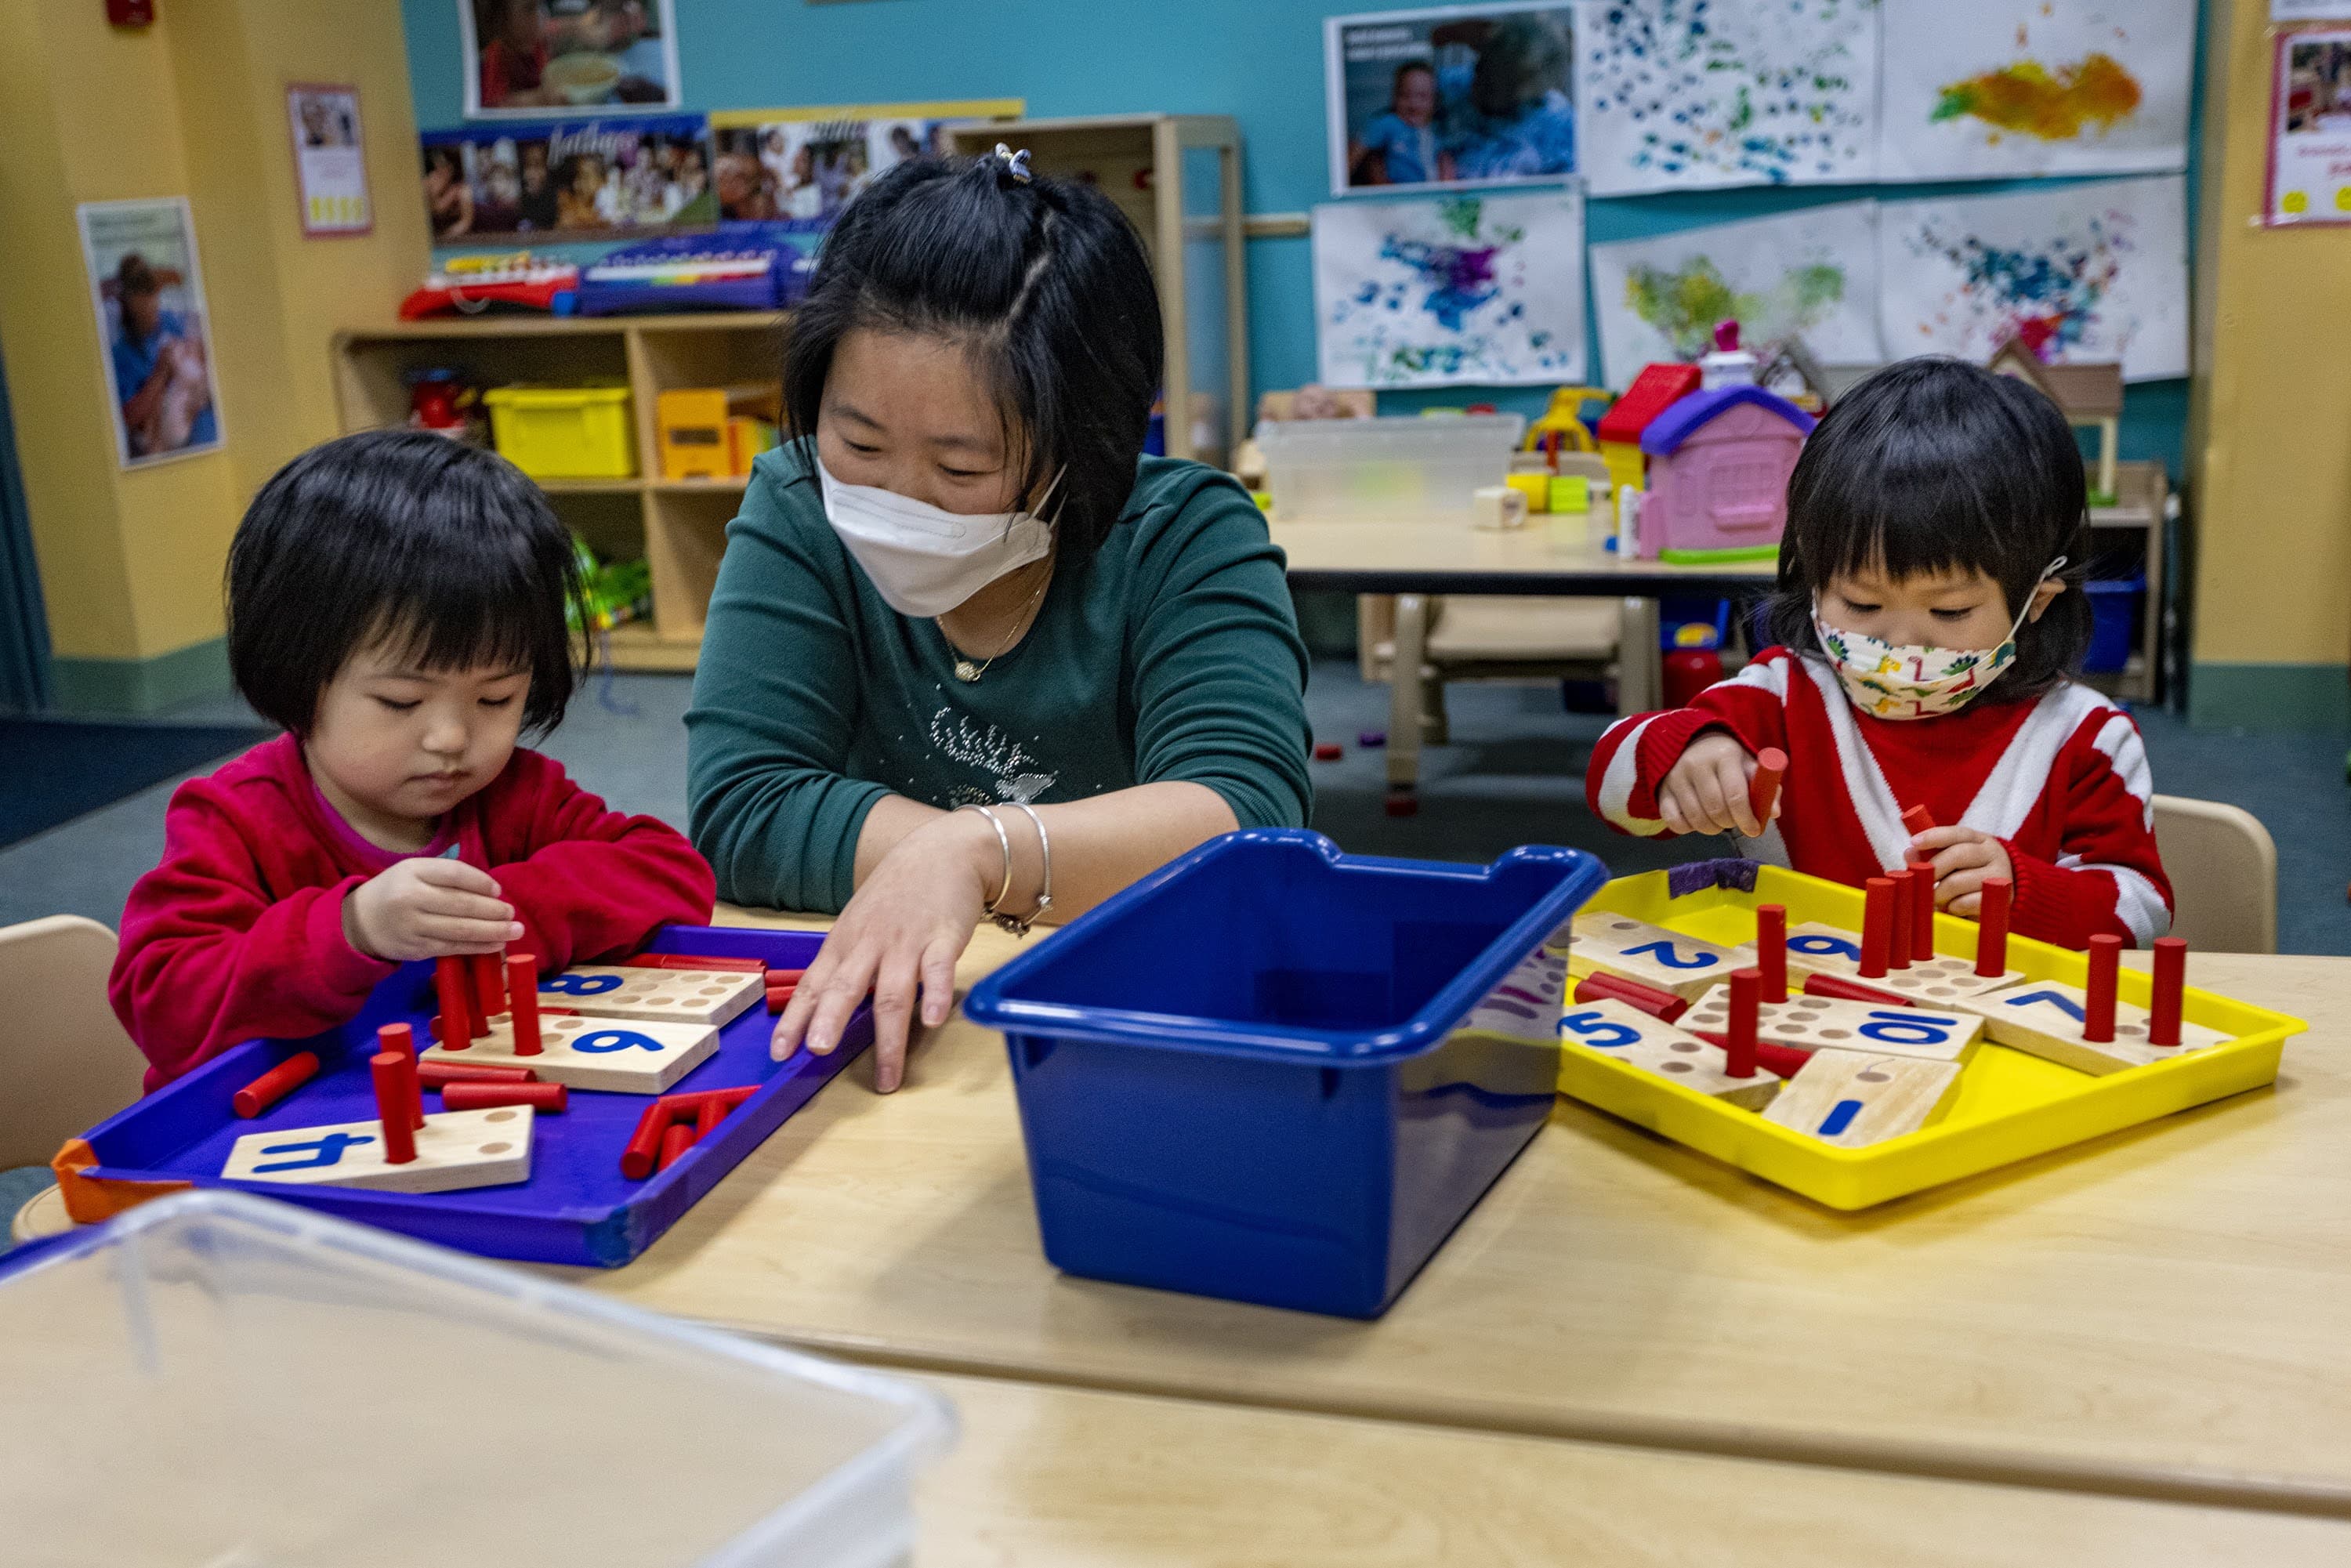 Teacher Mandy He works on counting with students at the Acorn Center for Early Education & Care at the Boston Chinatown Neighborhood Center. (Jesse Costa/WBUR)